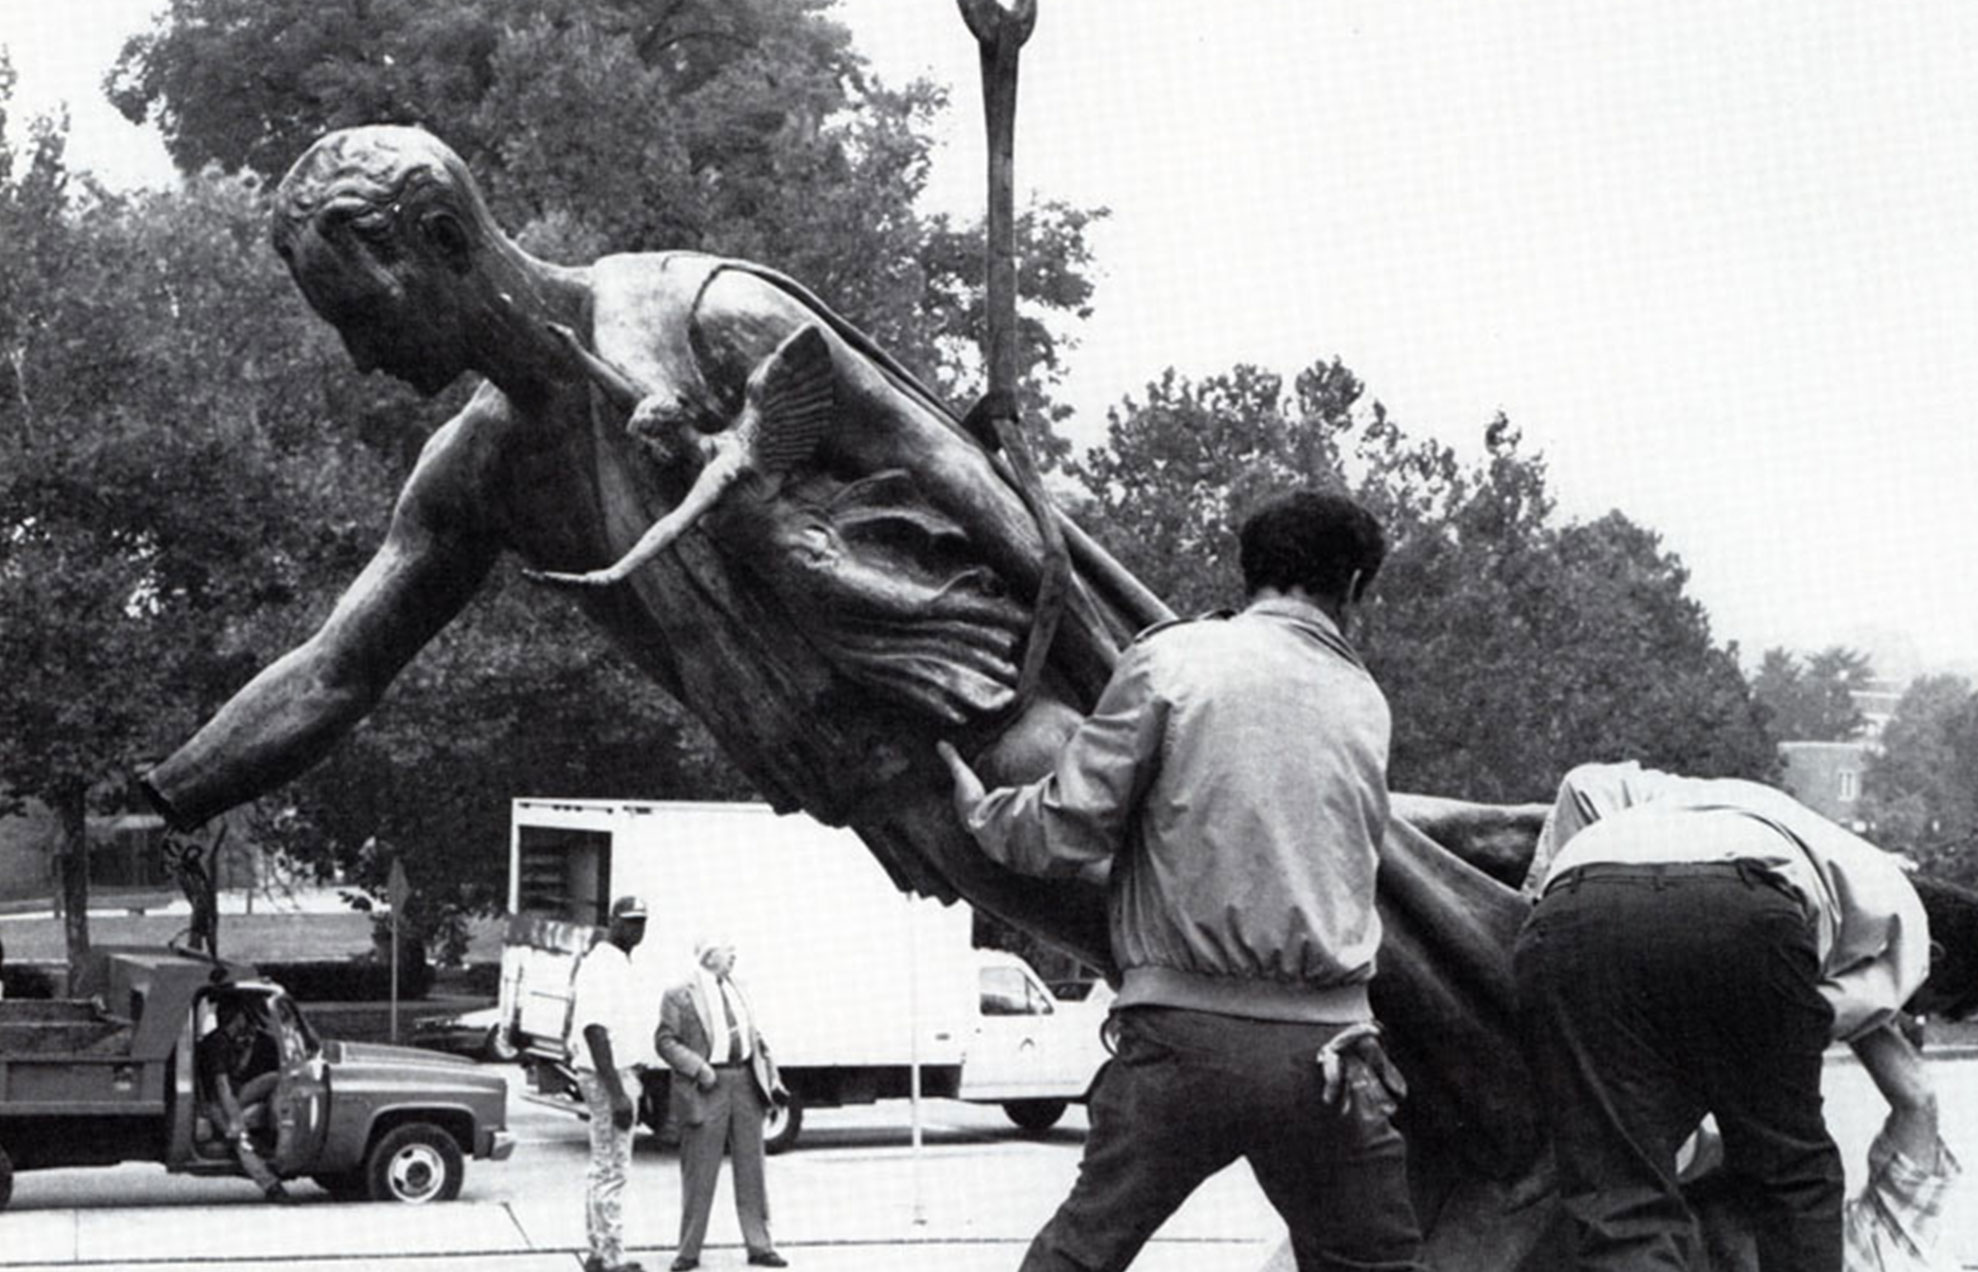 In October 1990, a gas explosion blew the statue off its base and broke off the hand holding the torch.